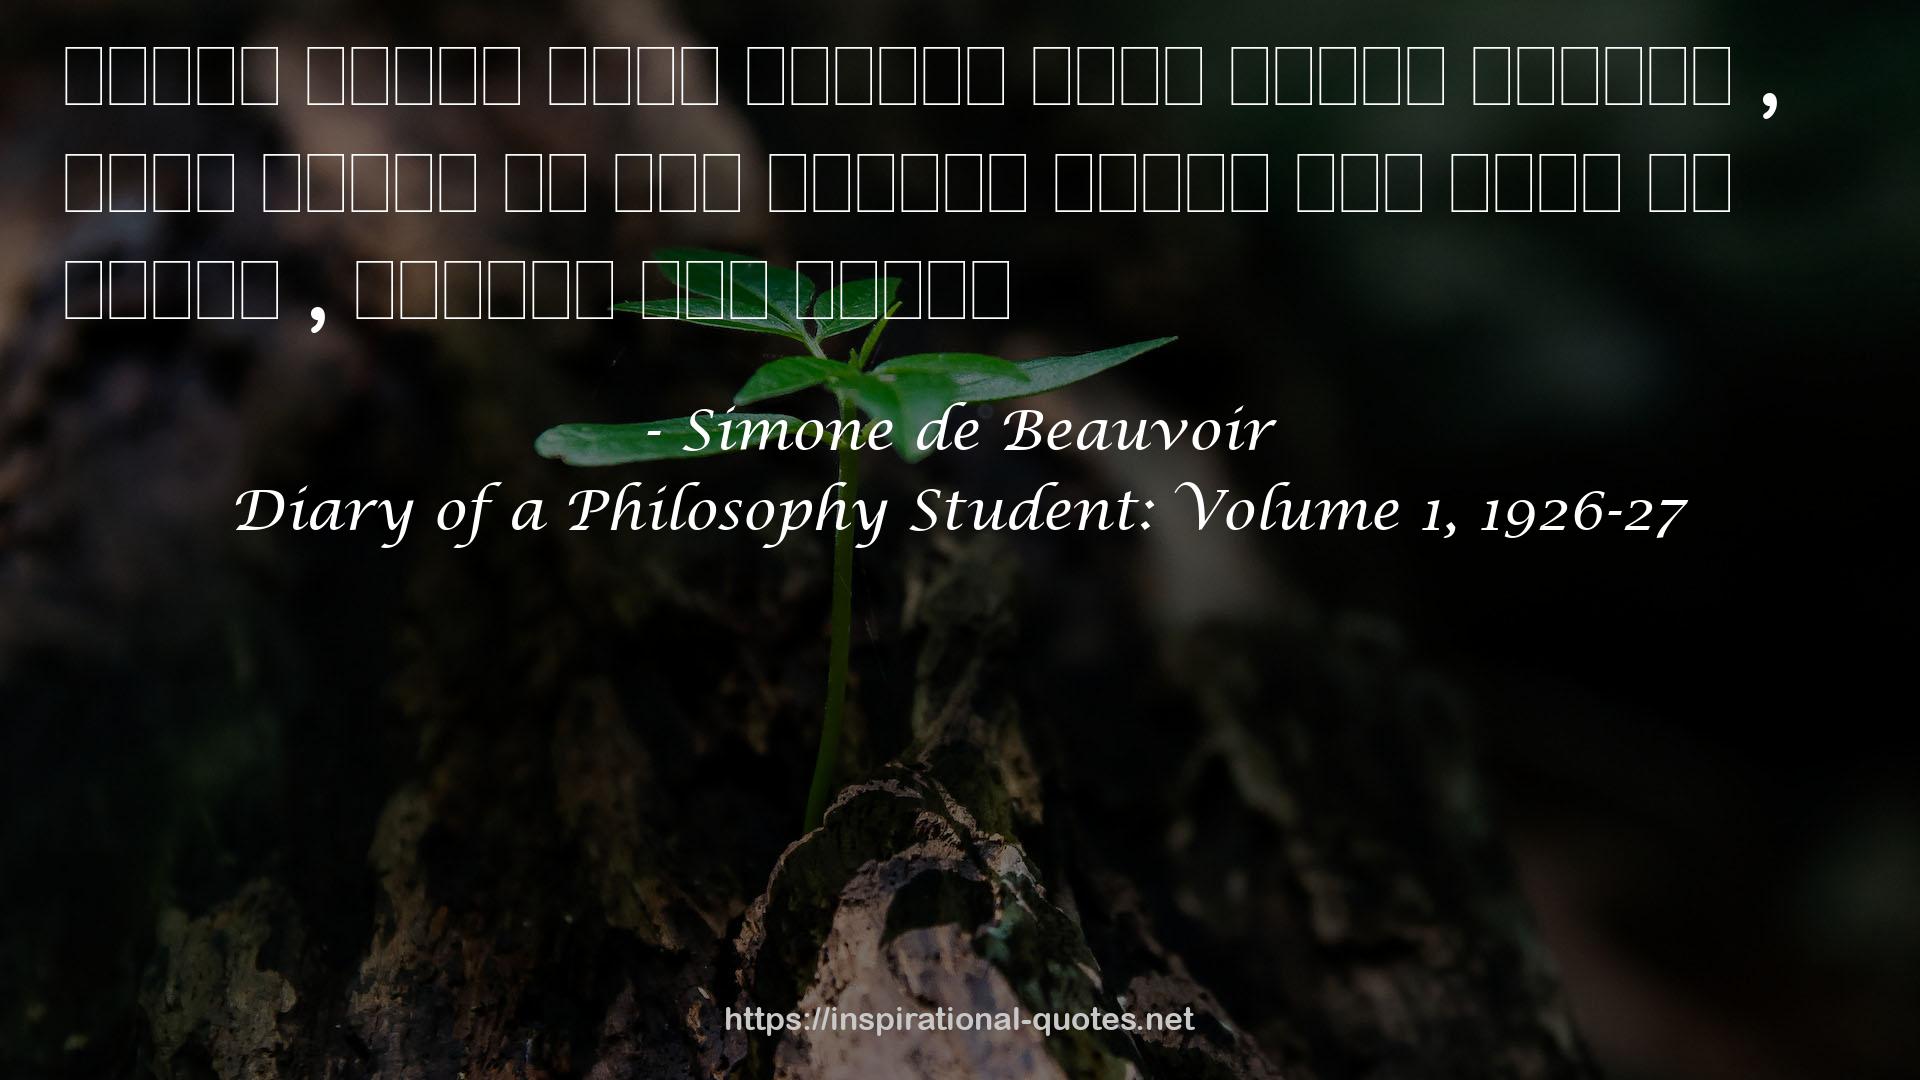 Diary of a Philosophy Student: Volume 1, 1926-27 QUOTES